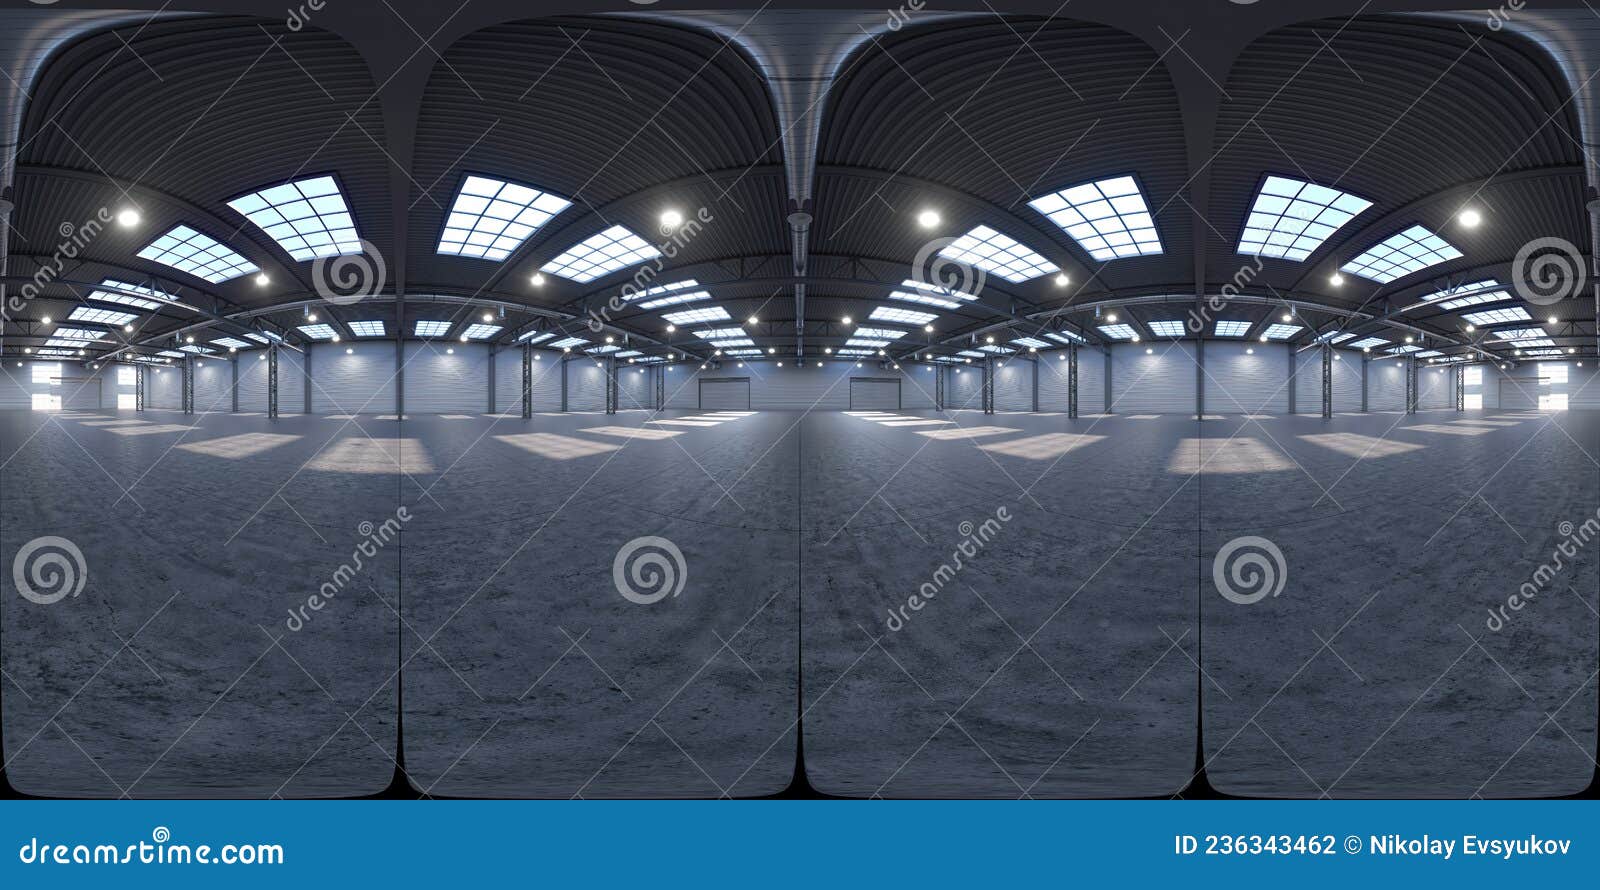 full spherical hdri panorama 360 degrees of empty exhibition space. backdrop for exhibitions and events. tile floor. marketing